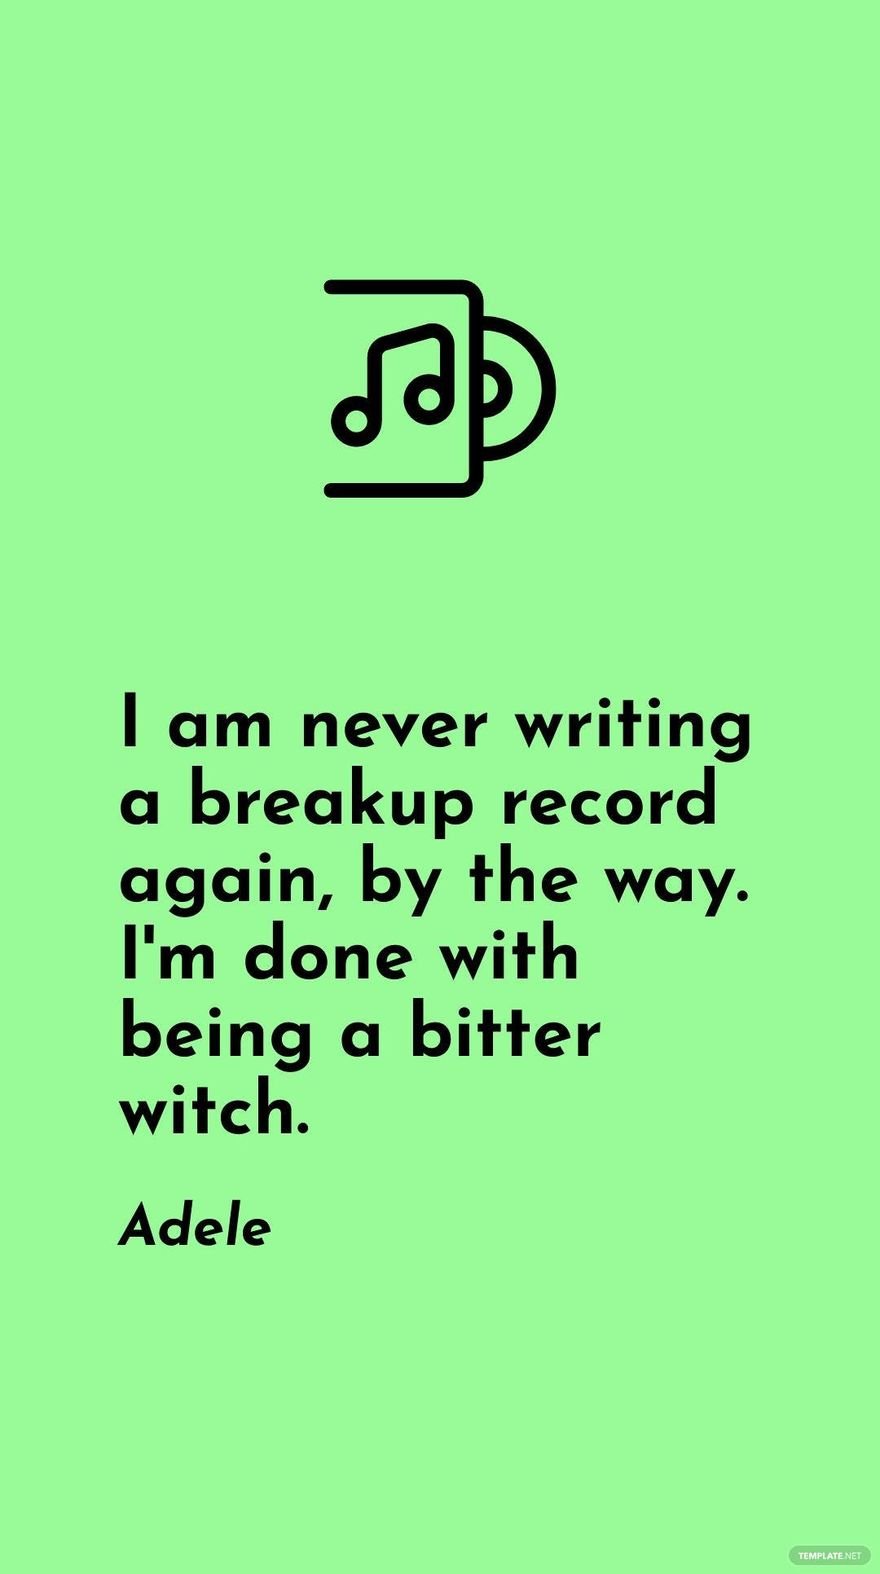 Adele - I am never writing a breakup record again, by the way. I'm done with being a bitter witch.